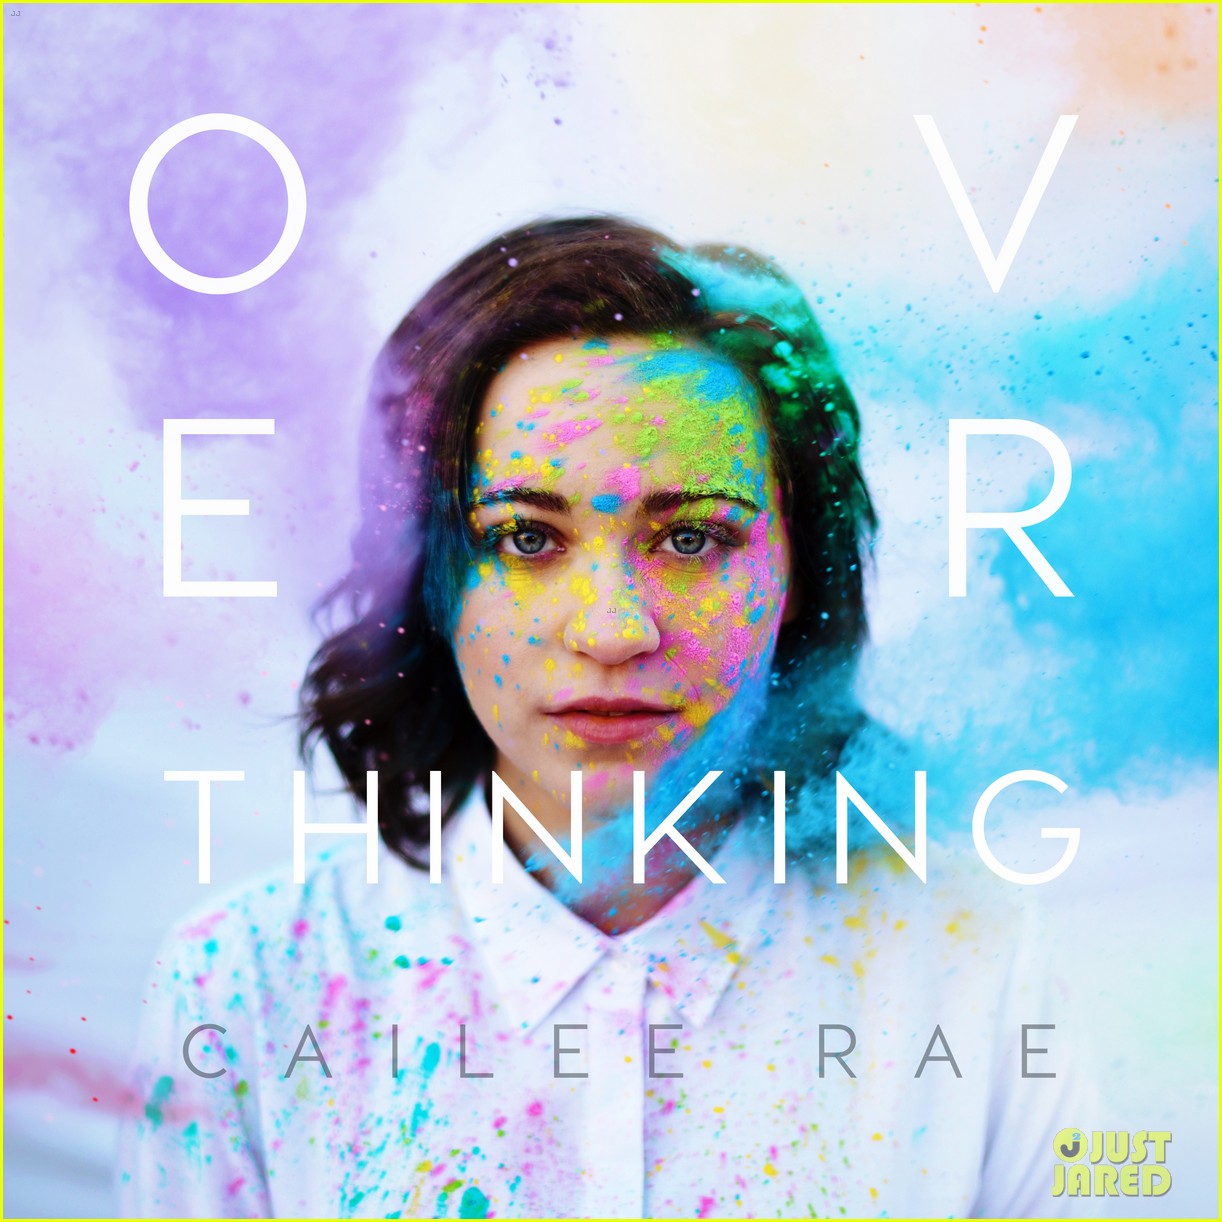 cailee rae overthinking ep 10 fun facts 02